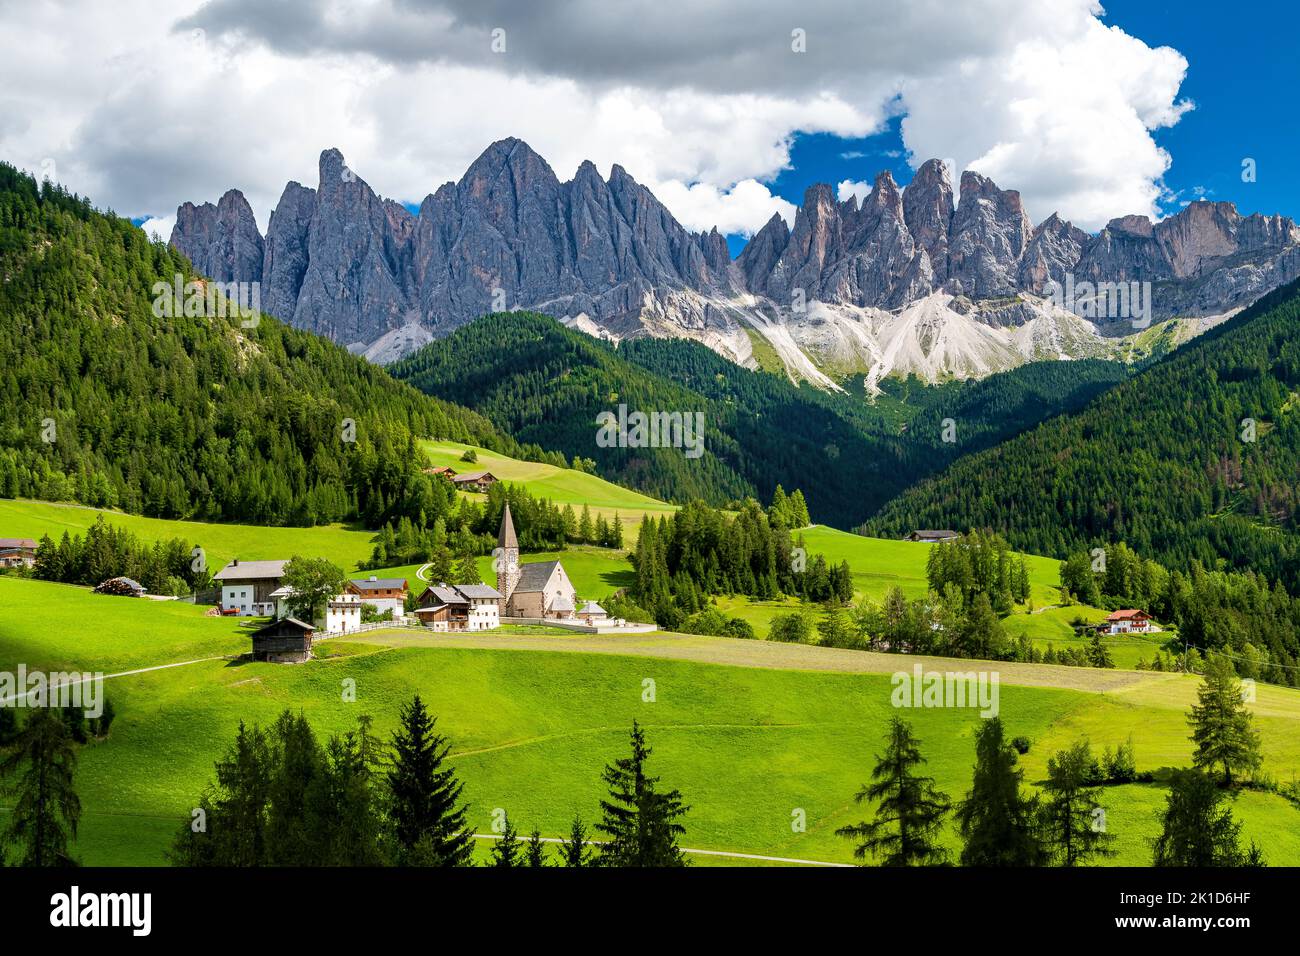 Saint Magdalena church of Villnöß (Funes) in South Tyrol in northern Italy with the iconic Gruppo delle Odle mountains of the Dolomite Alps in the bac Stock Photo